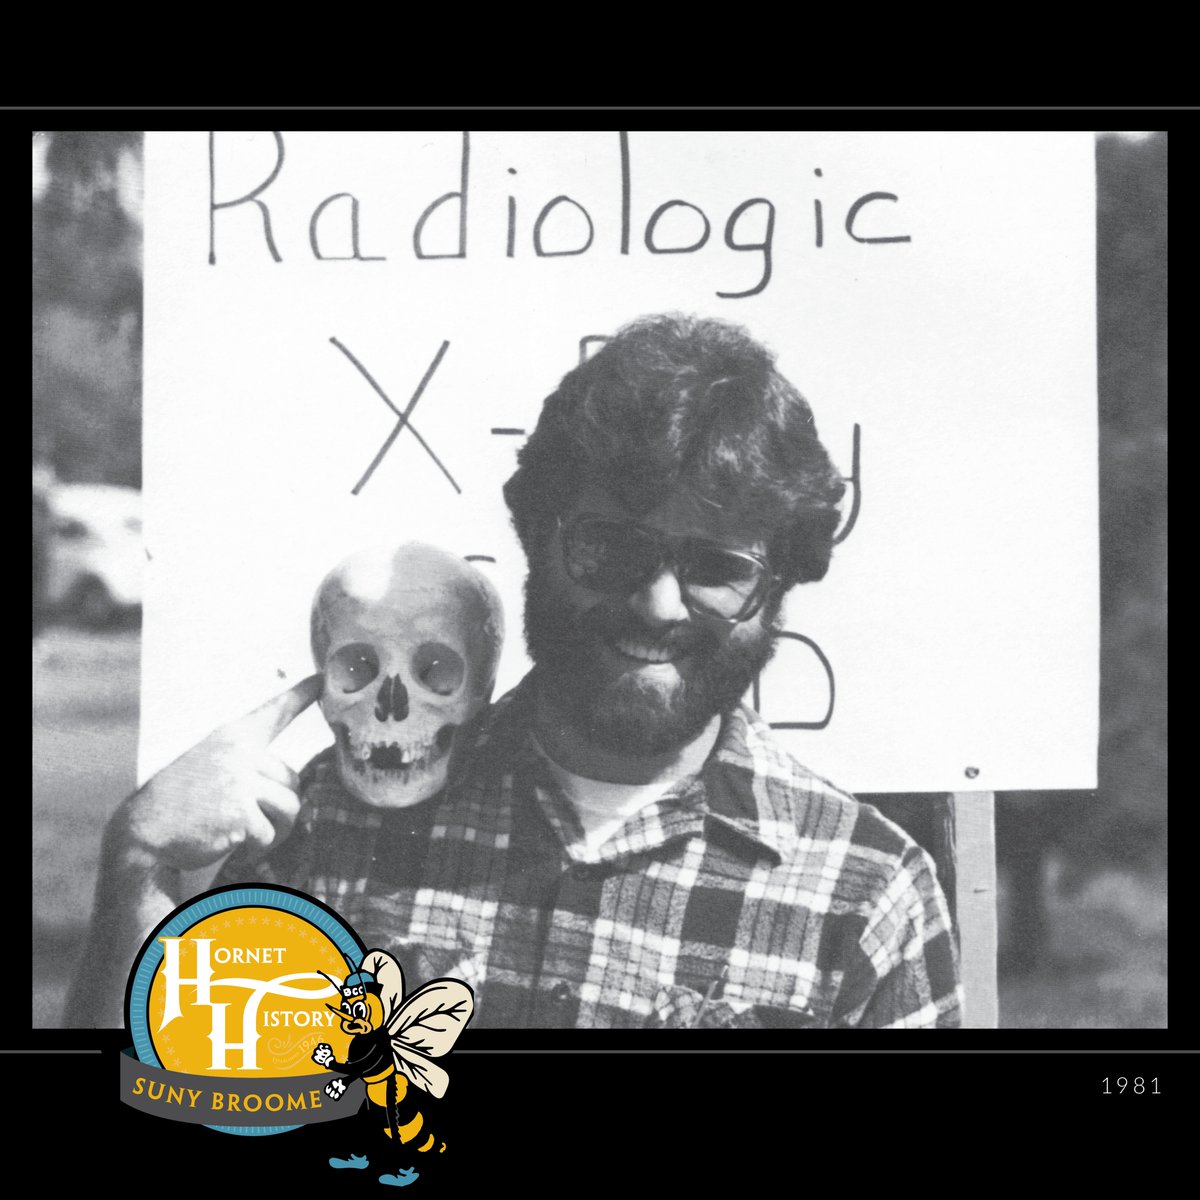 This 1981 photo is of a Radiologic Technology club member posing with a skull and trying to gain attention for his Activities Fair table. #hornethistory #throwbackthursday #sunybroome #1980s #radiologictechnology #radtech #binghamtonhistory